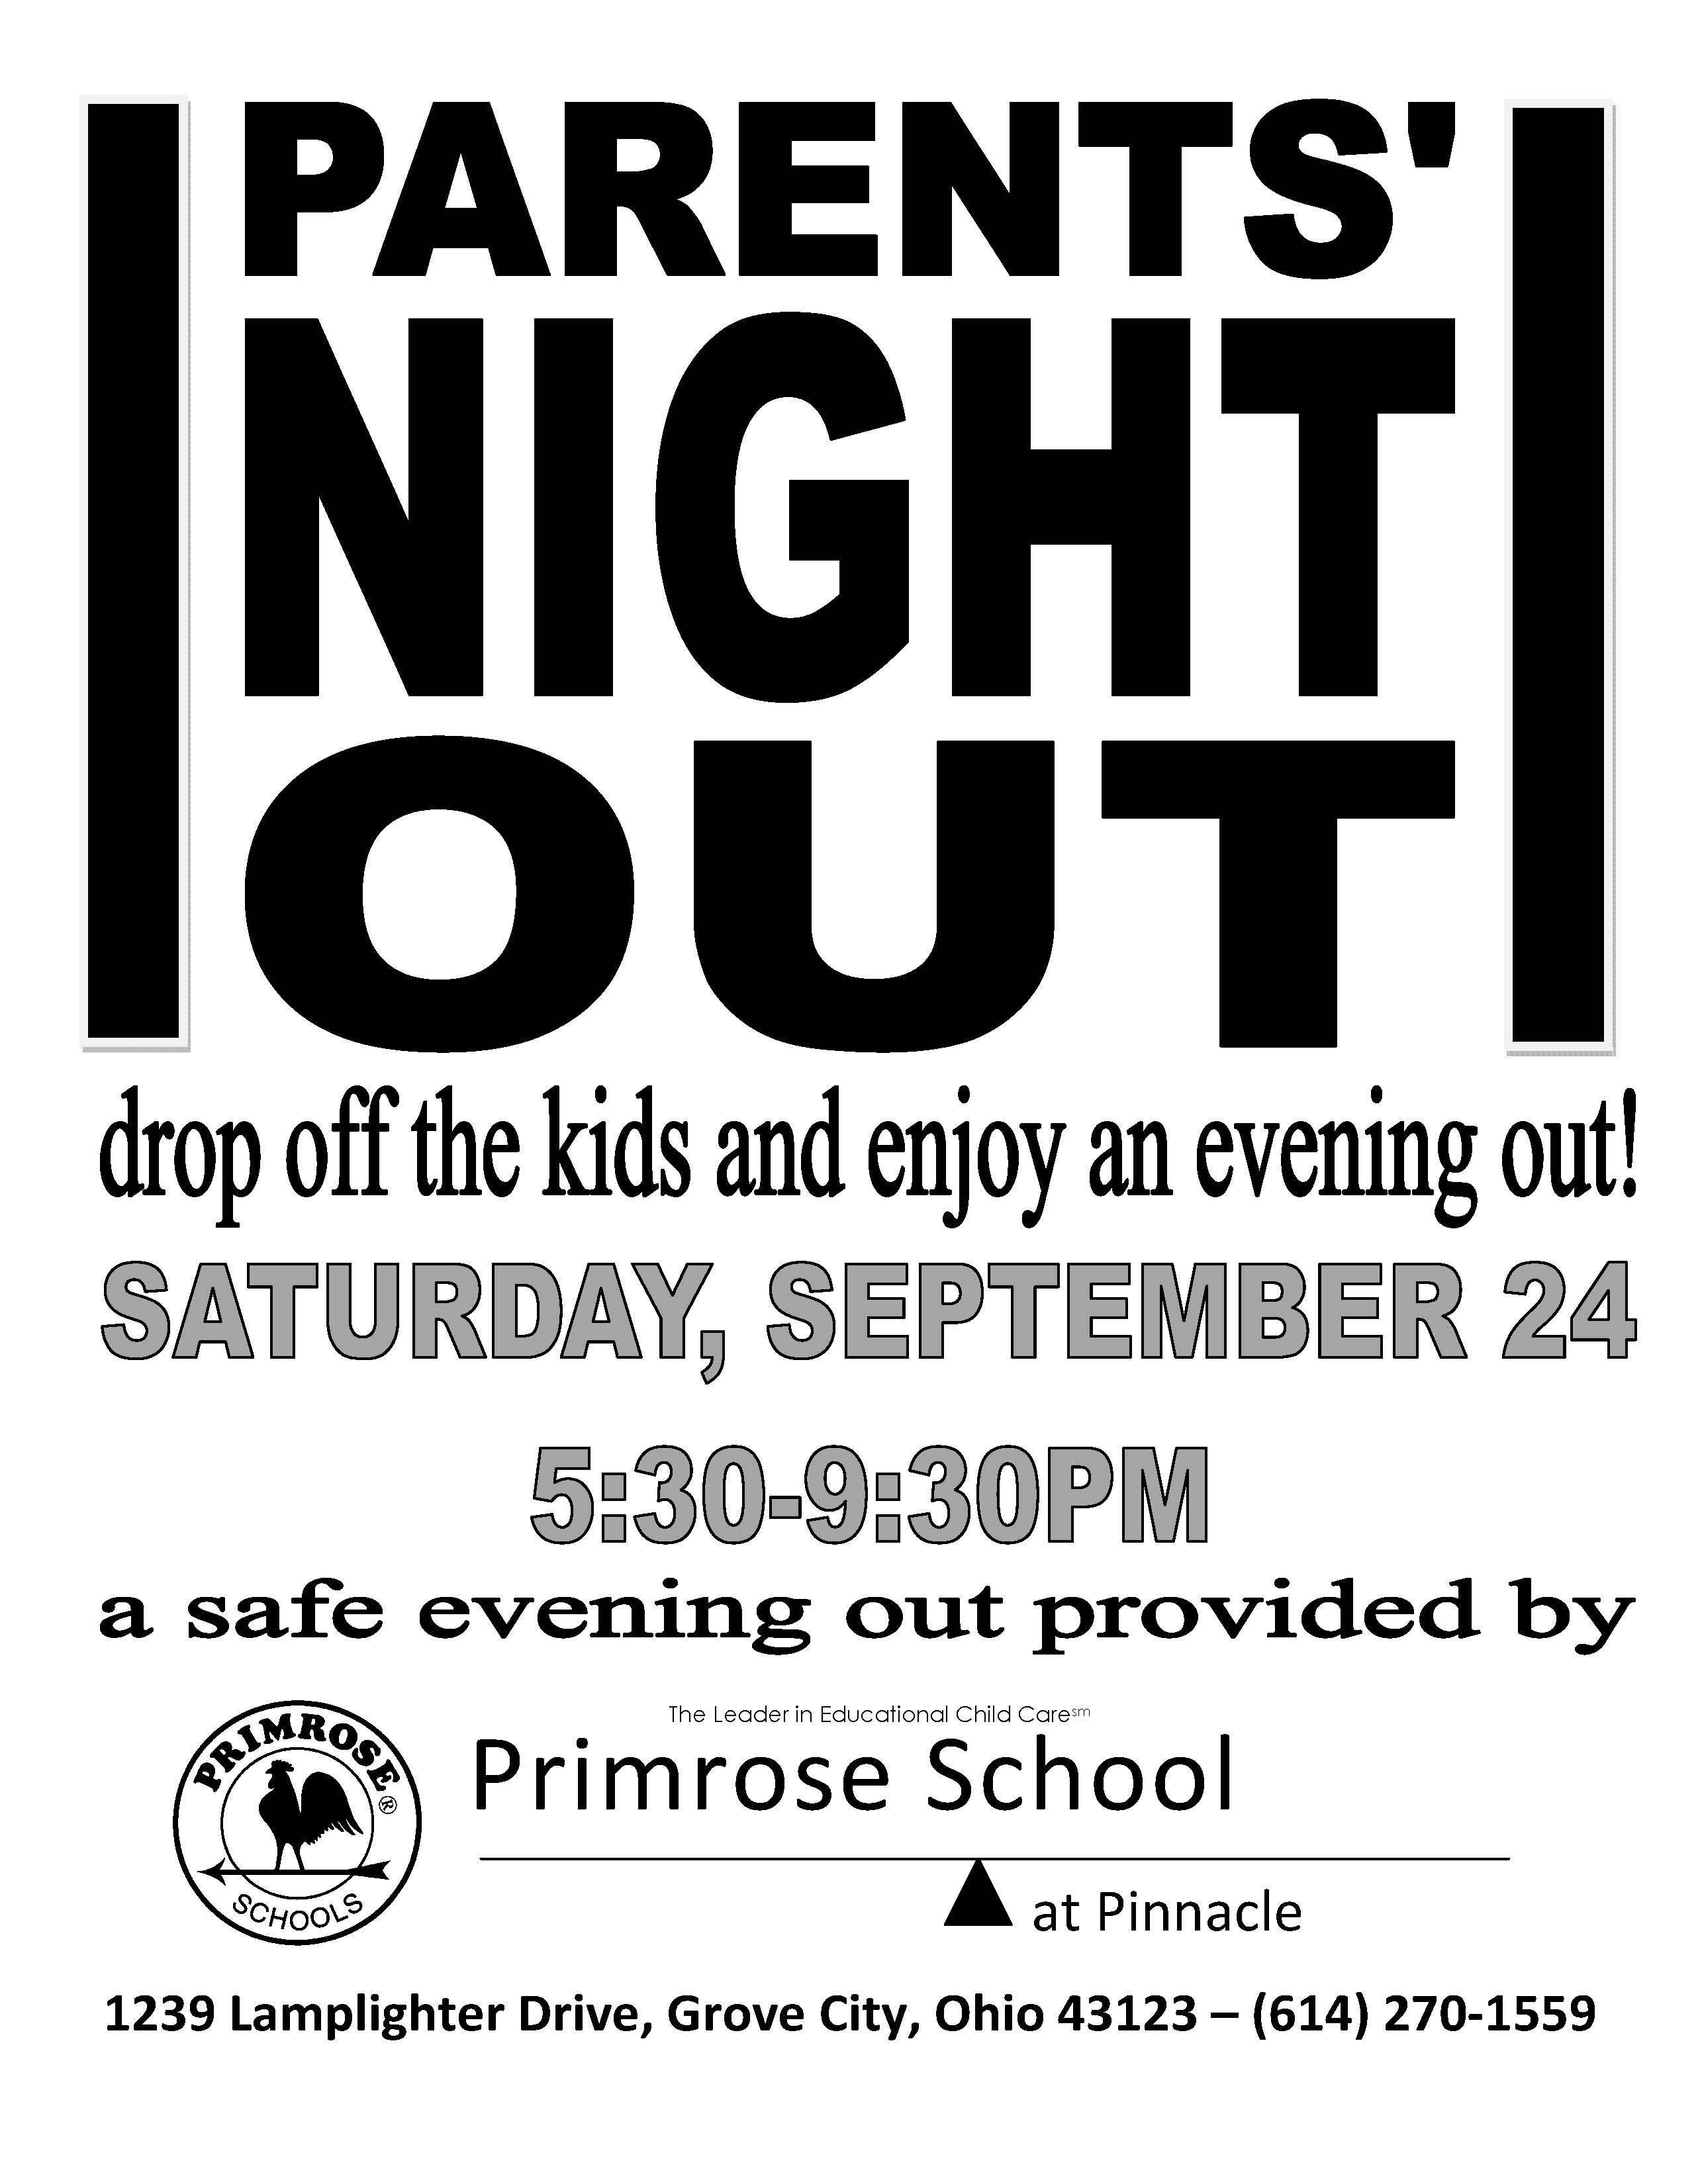 Parents Night Out Flyer Image